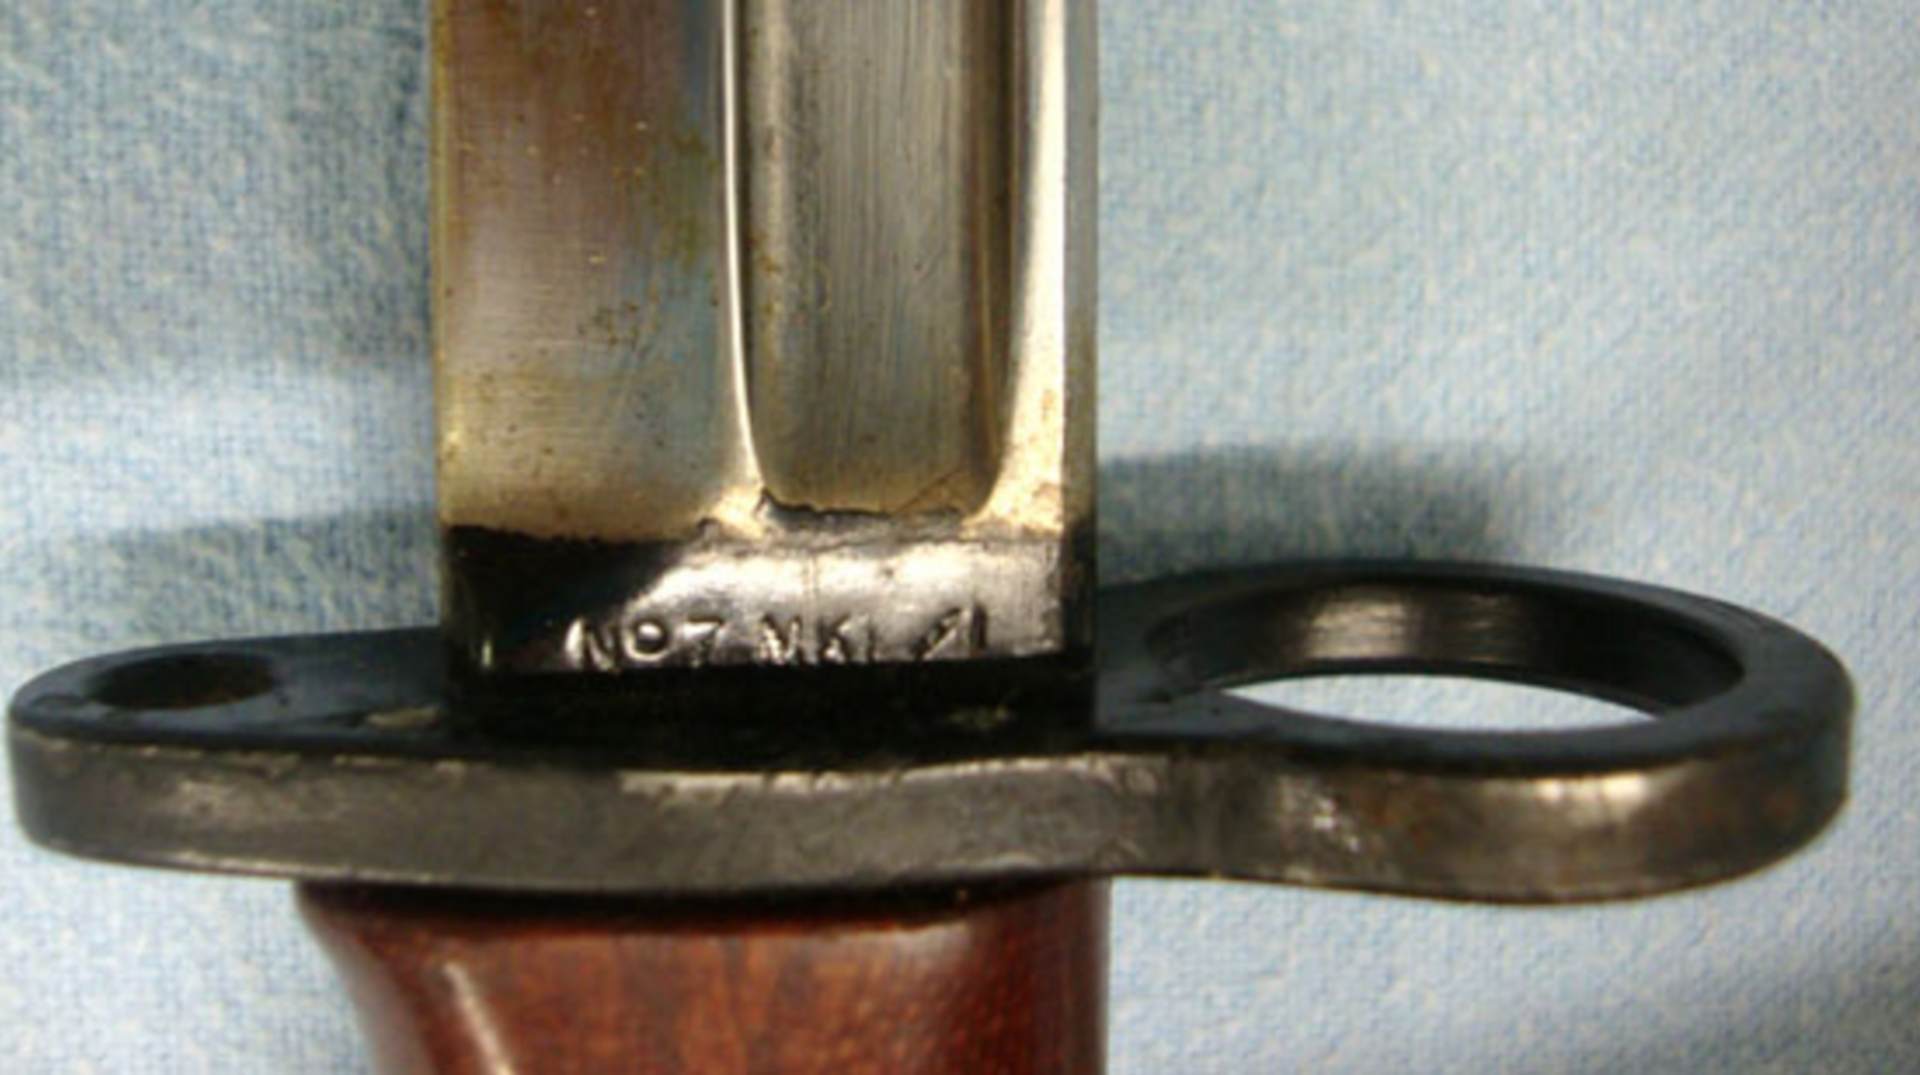 British No 7 MK 1/L Swivelling Pommel Bayonet With Red Composite Grips For No 4 Rifles and Scabbard - Image 2 of 3